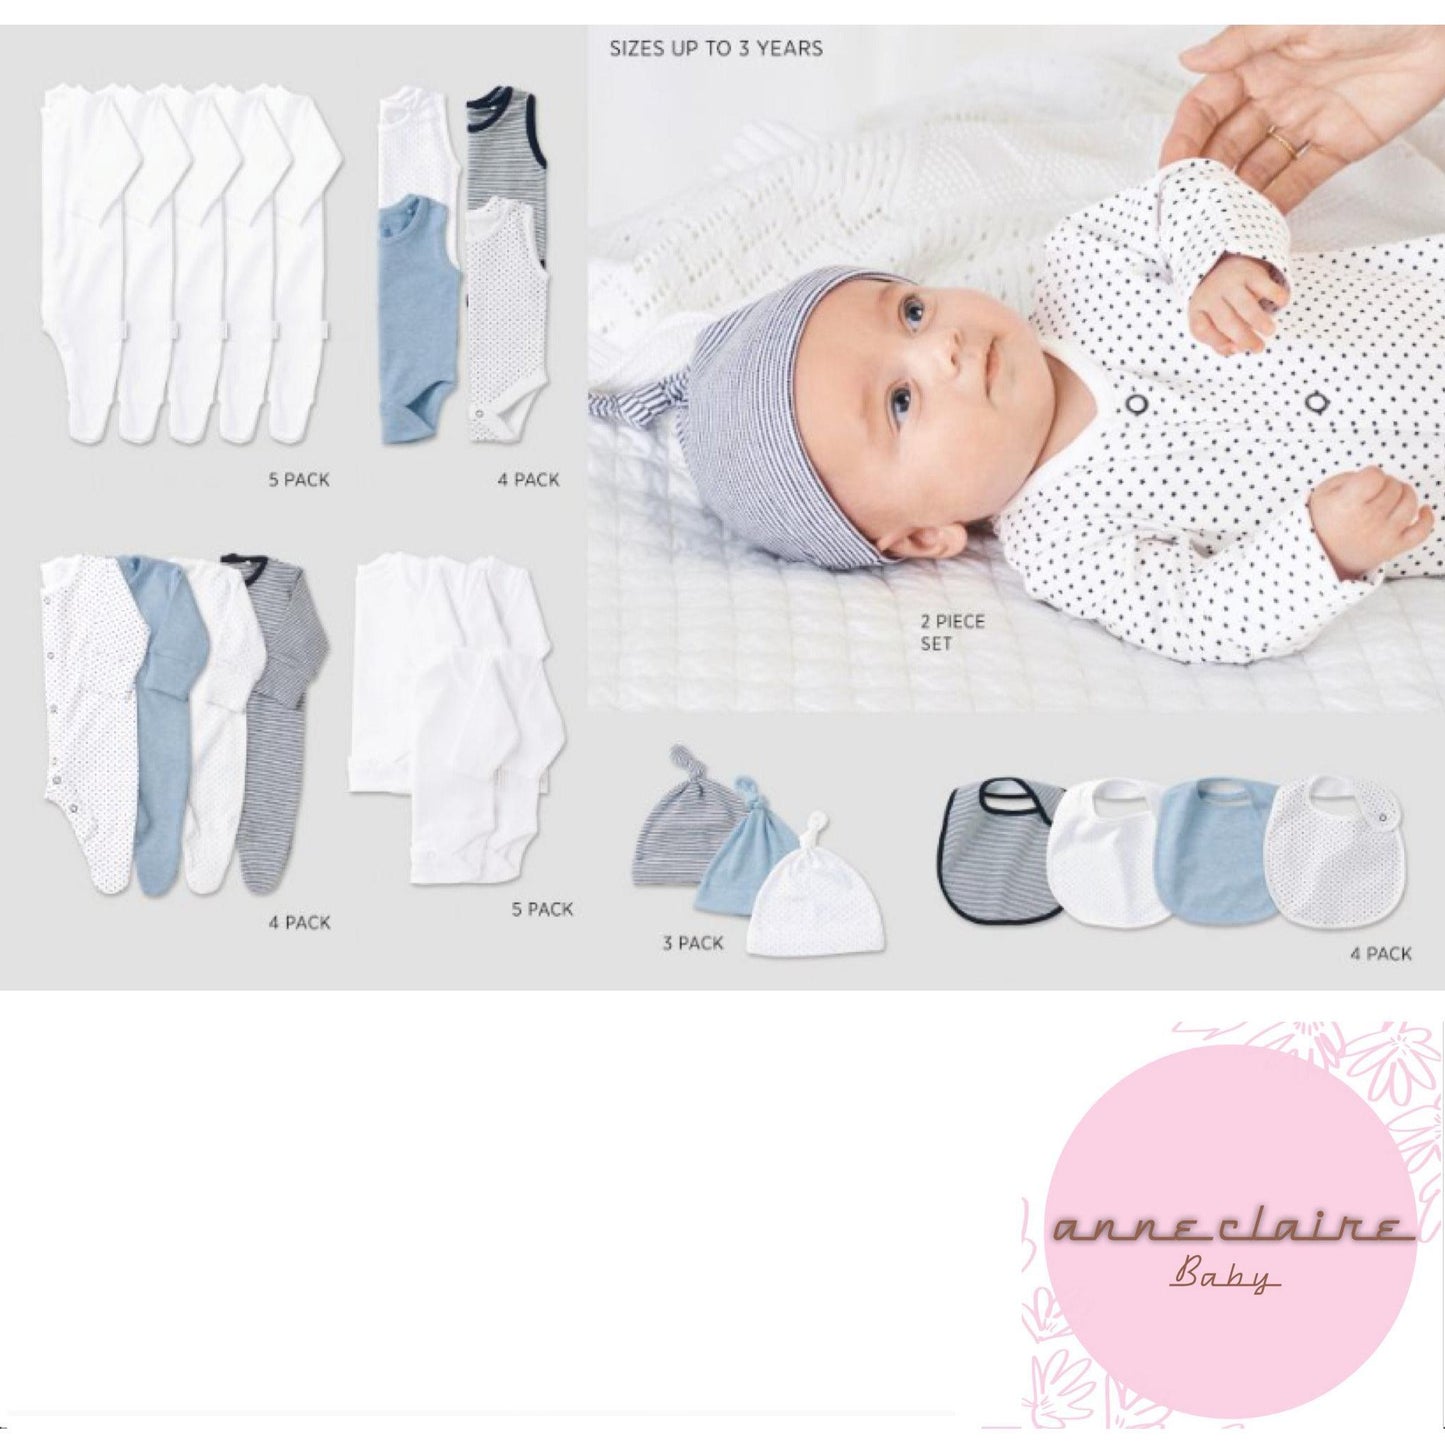 Enxoval - Meu Primeiro Guarda Roupa Bestseller Anne Claire Baby Store Blue & White 55 itens RN a 6 meses 